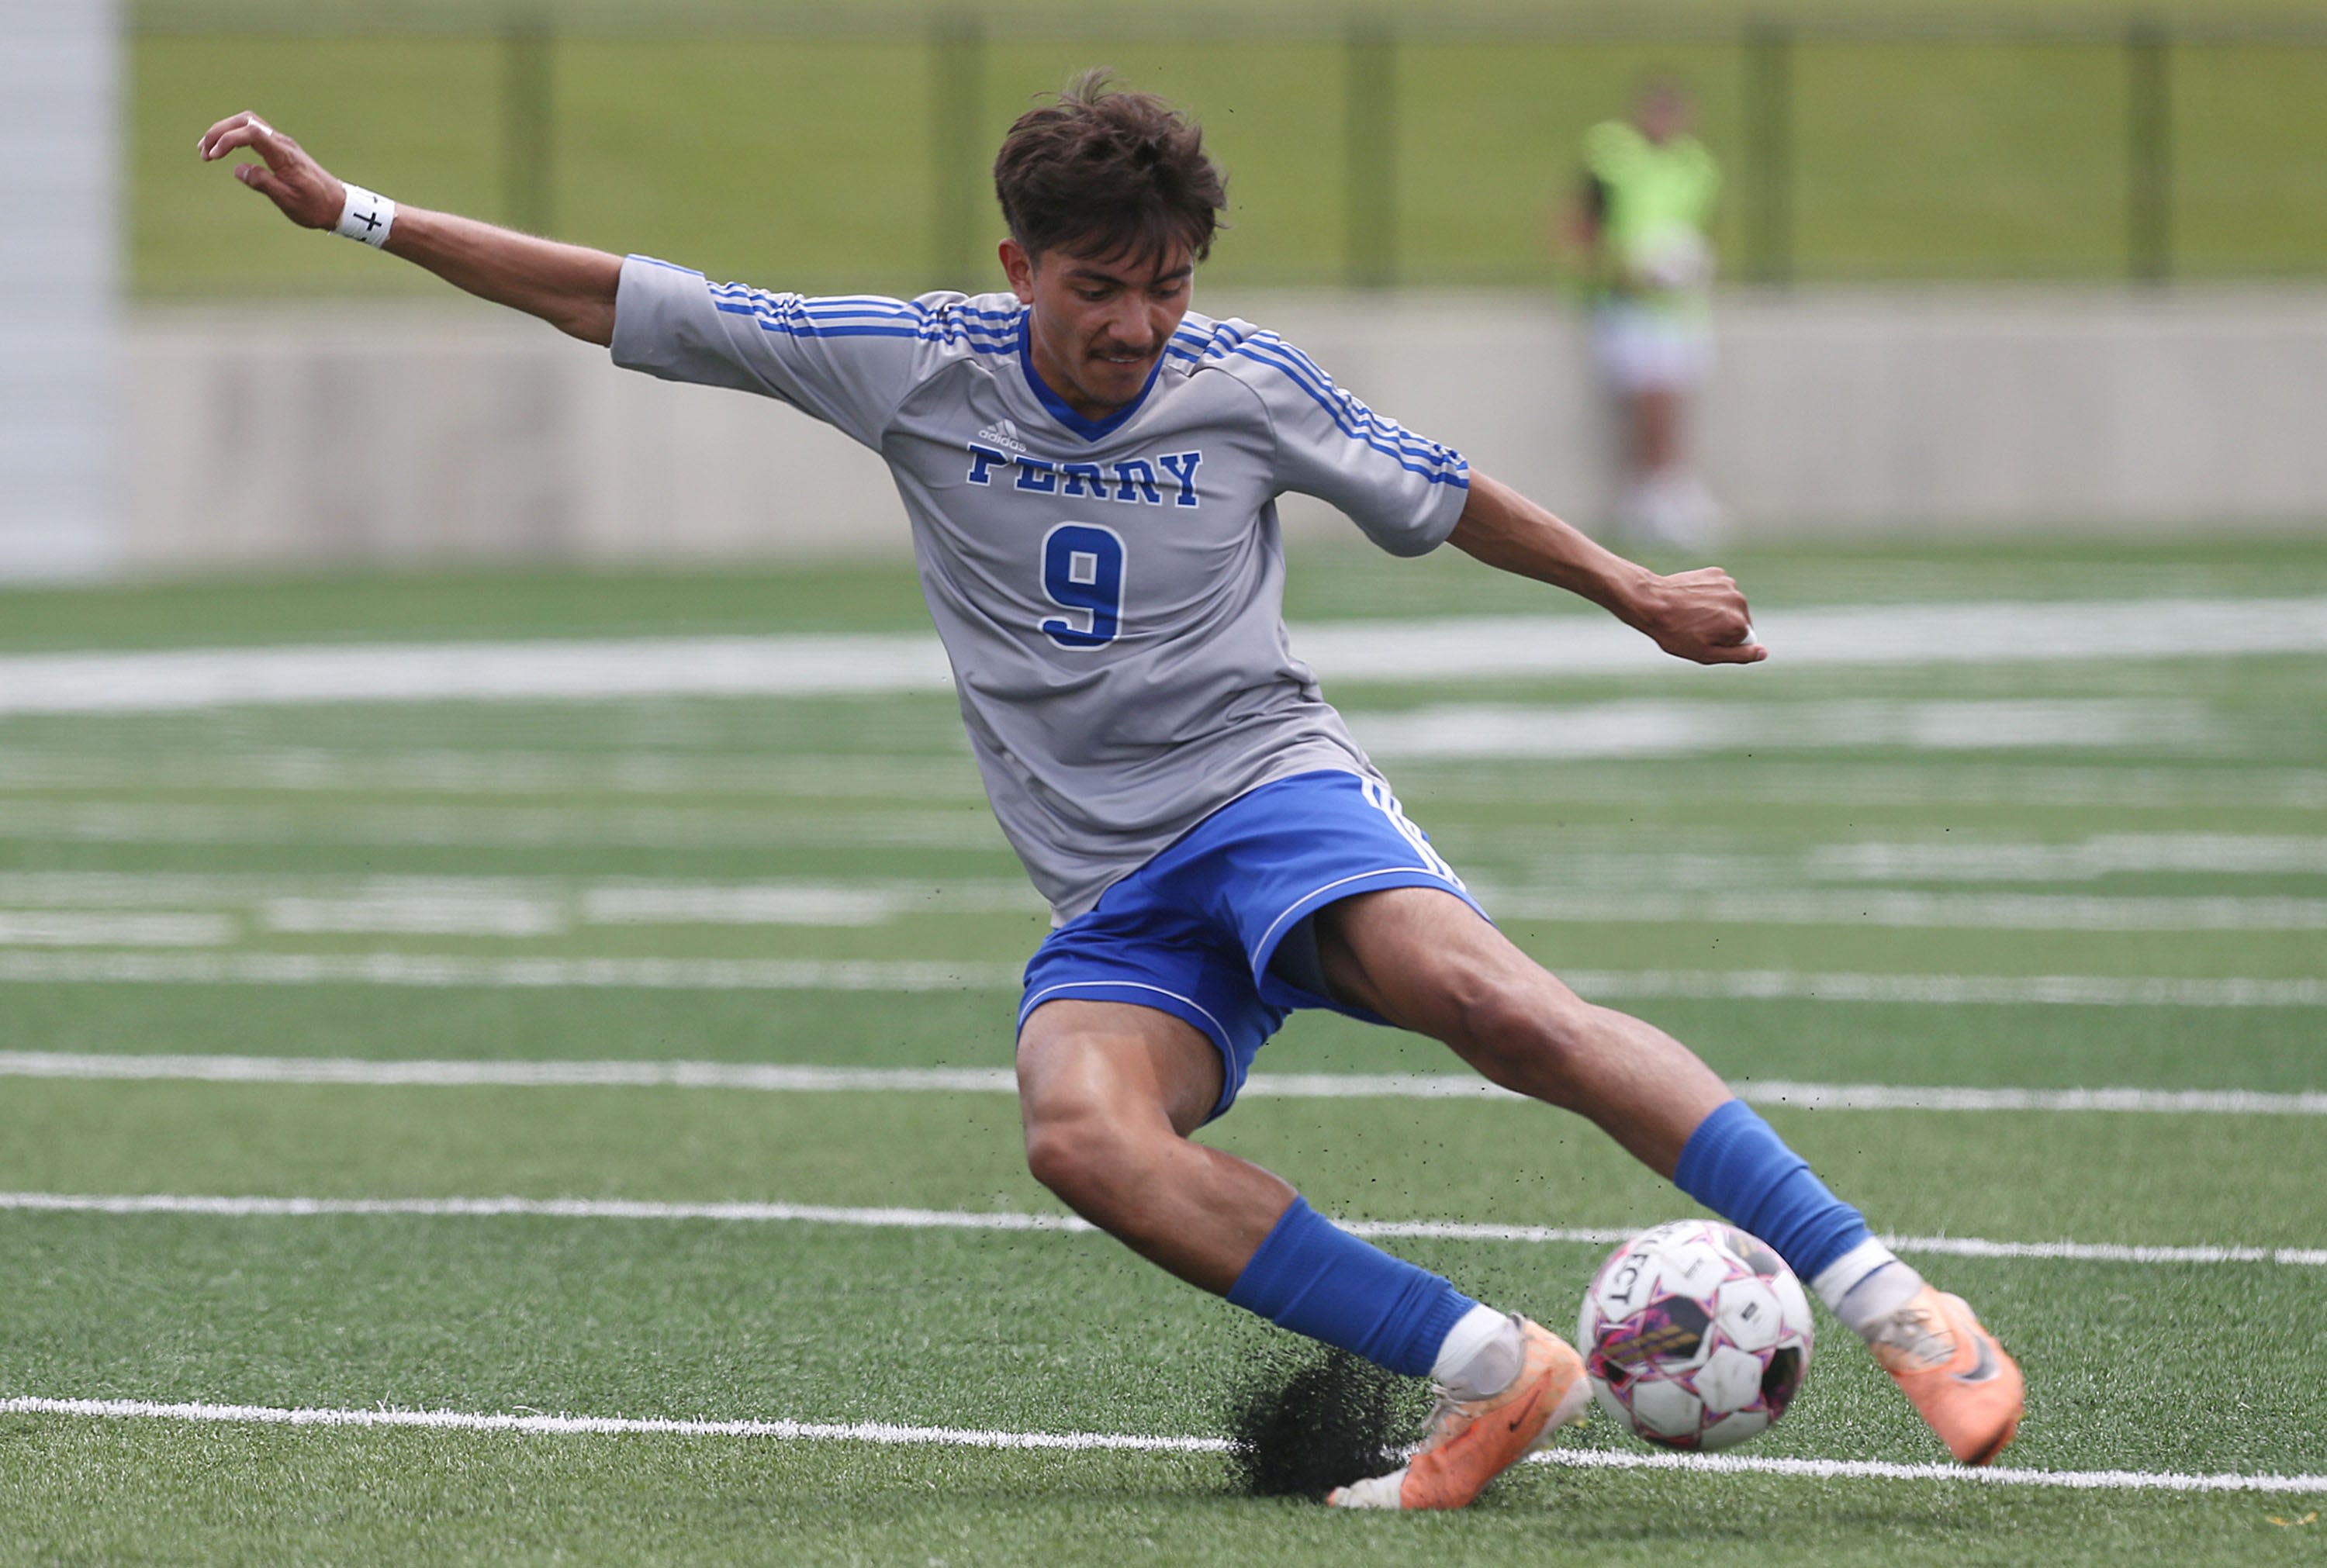 Class 2A Iowa boys state soccer semifinals roundup: Perry loses to Assumption, 1-0, on Friday